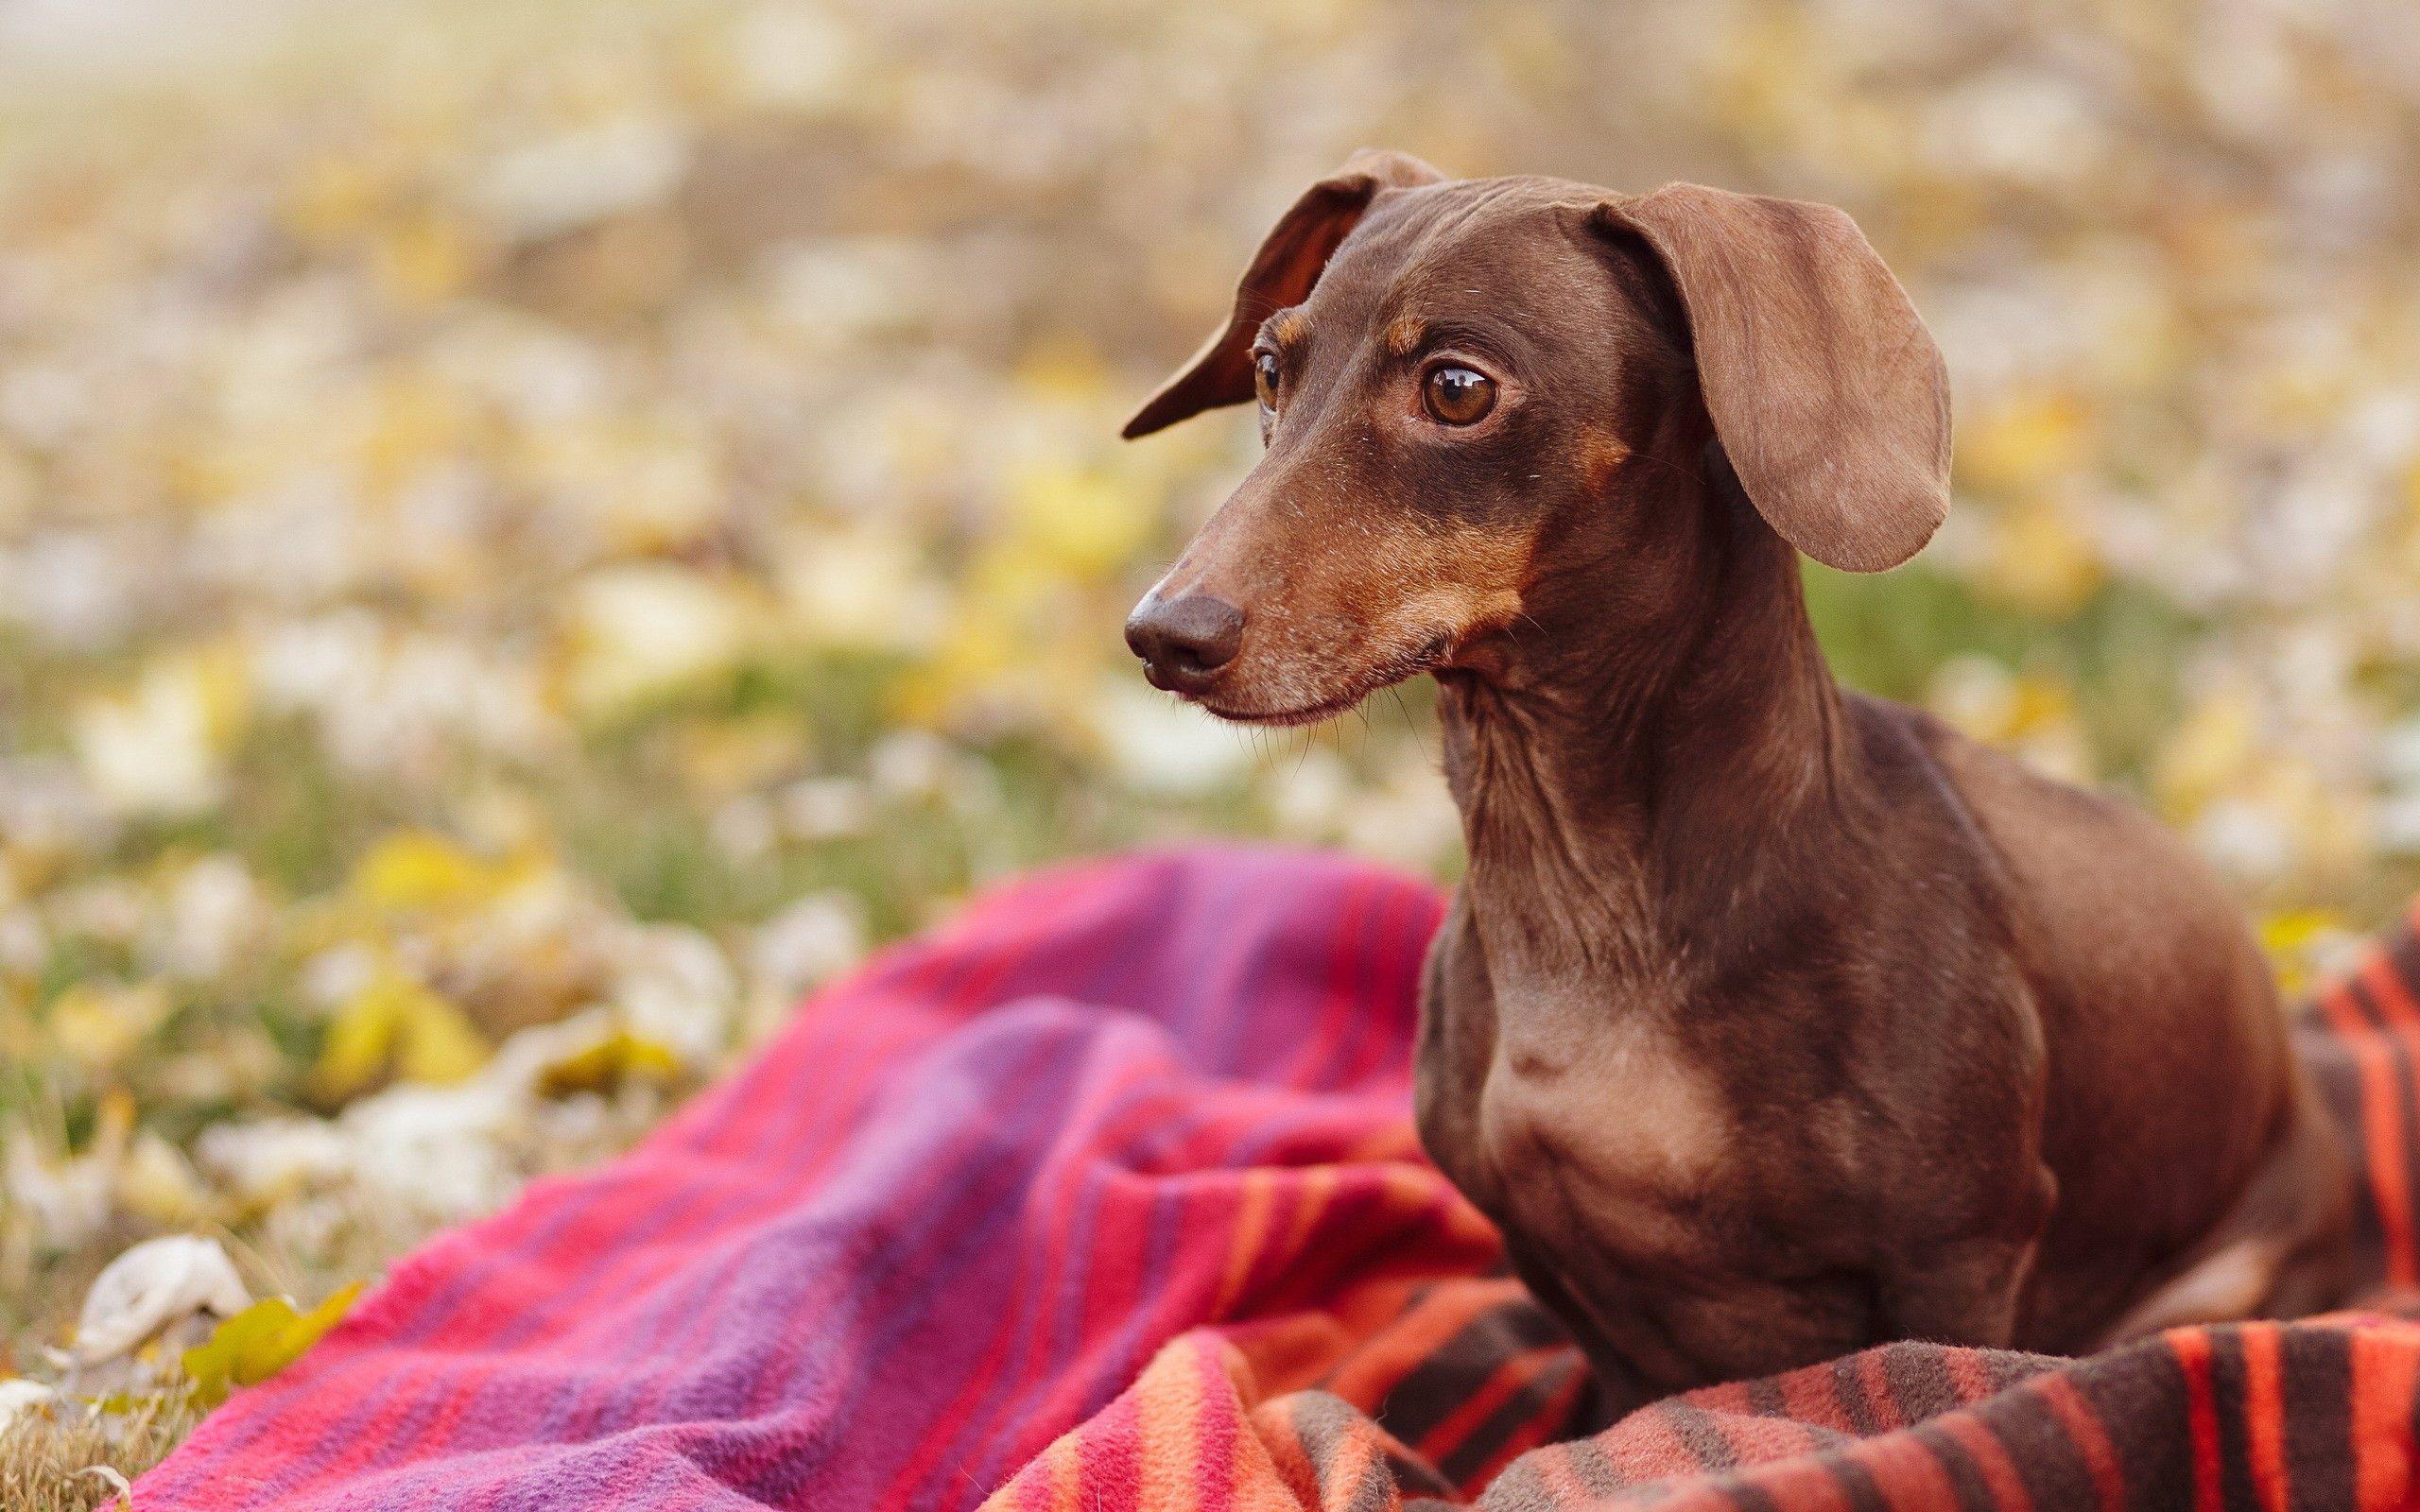 Dachshund Wallpapers - Wallpaper Cave2560 x 1600